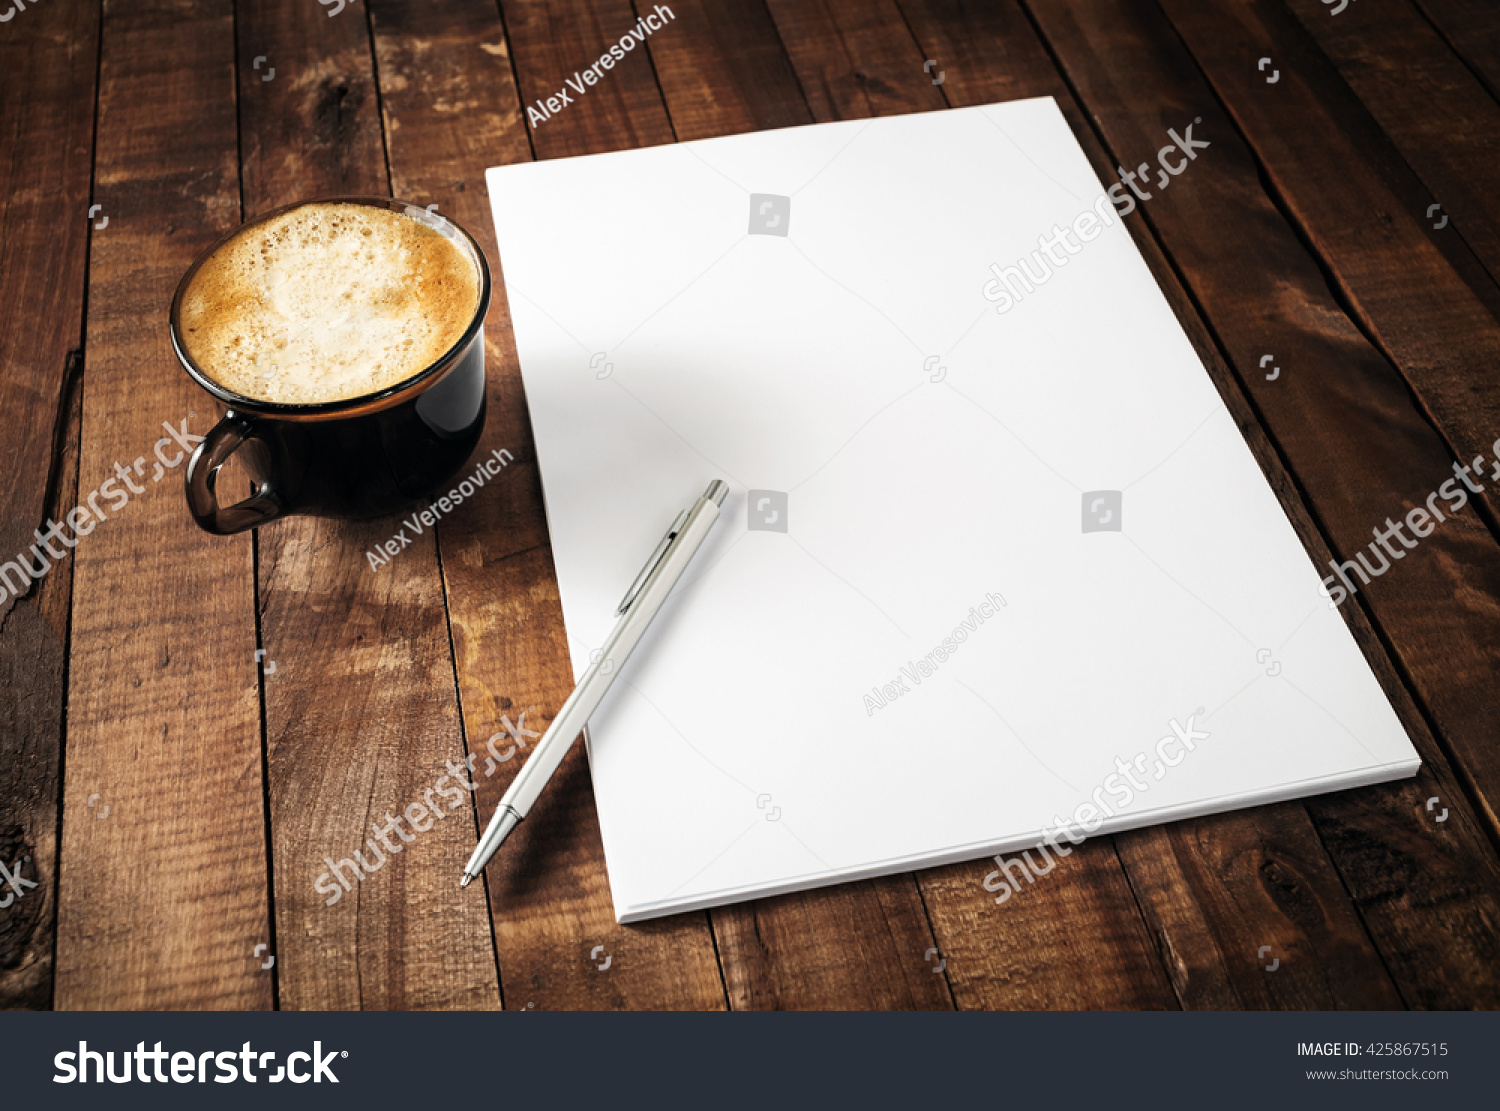 Blank branding template on vintage wooden table background. Letterhead, coffee cup and pen. Photo of blank stationery. Mock-up for design portfolios. #425867515